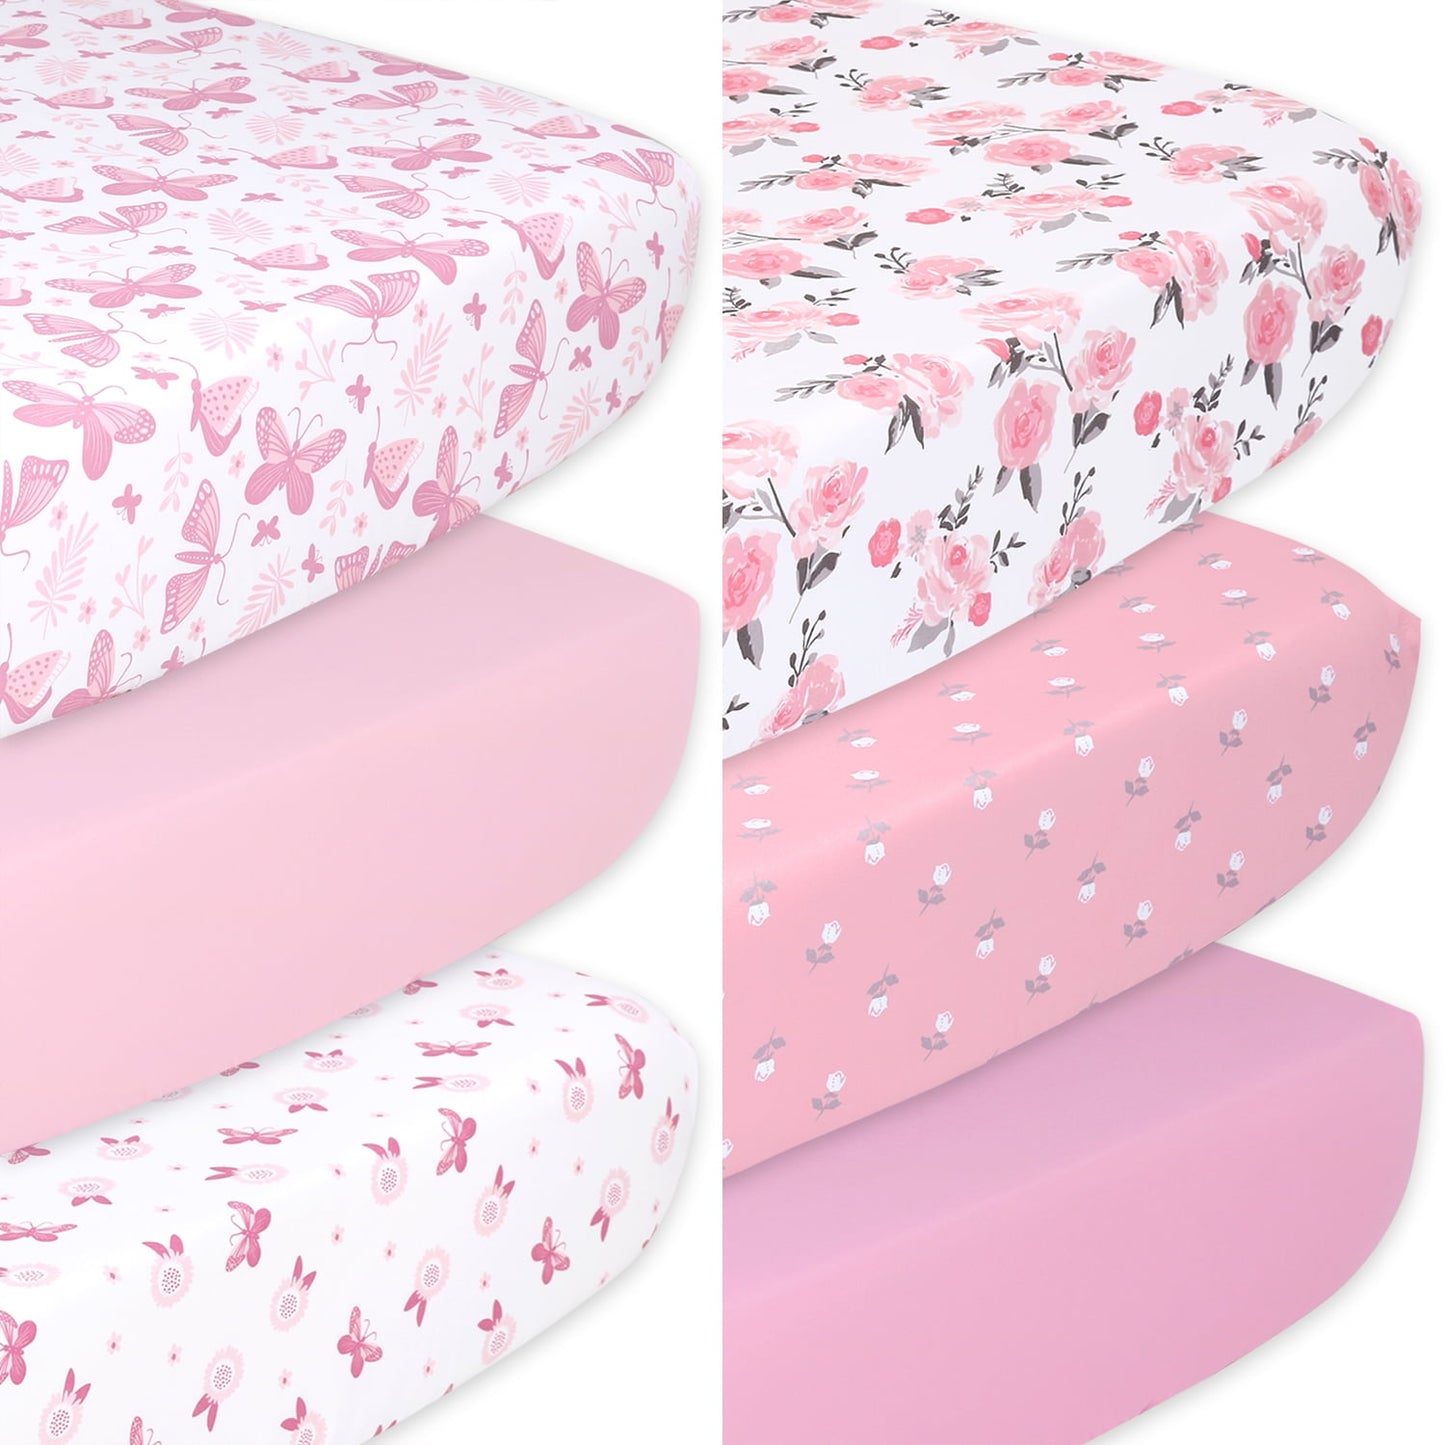 Enchanting Garden Dreams Fitted Crib Sheets - 6 Pack